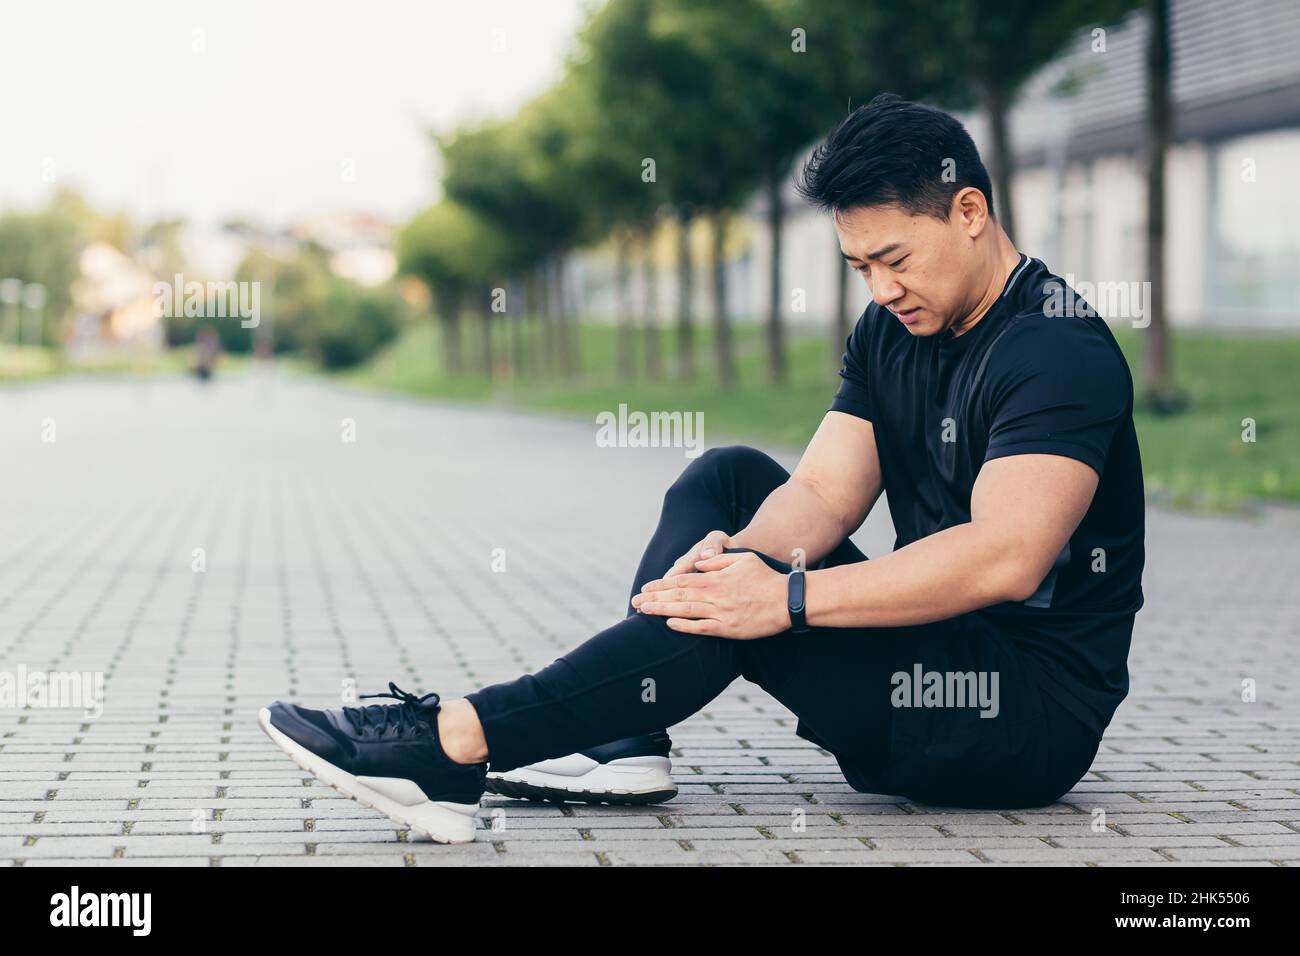 Asian man after fitness workout and jogging sits on the ground and suffers from leg pain, massages leg muscles Stock Photo